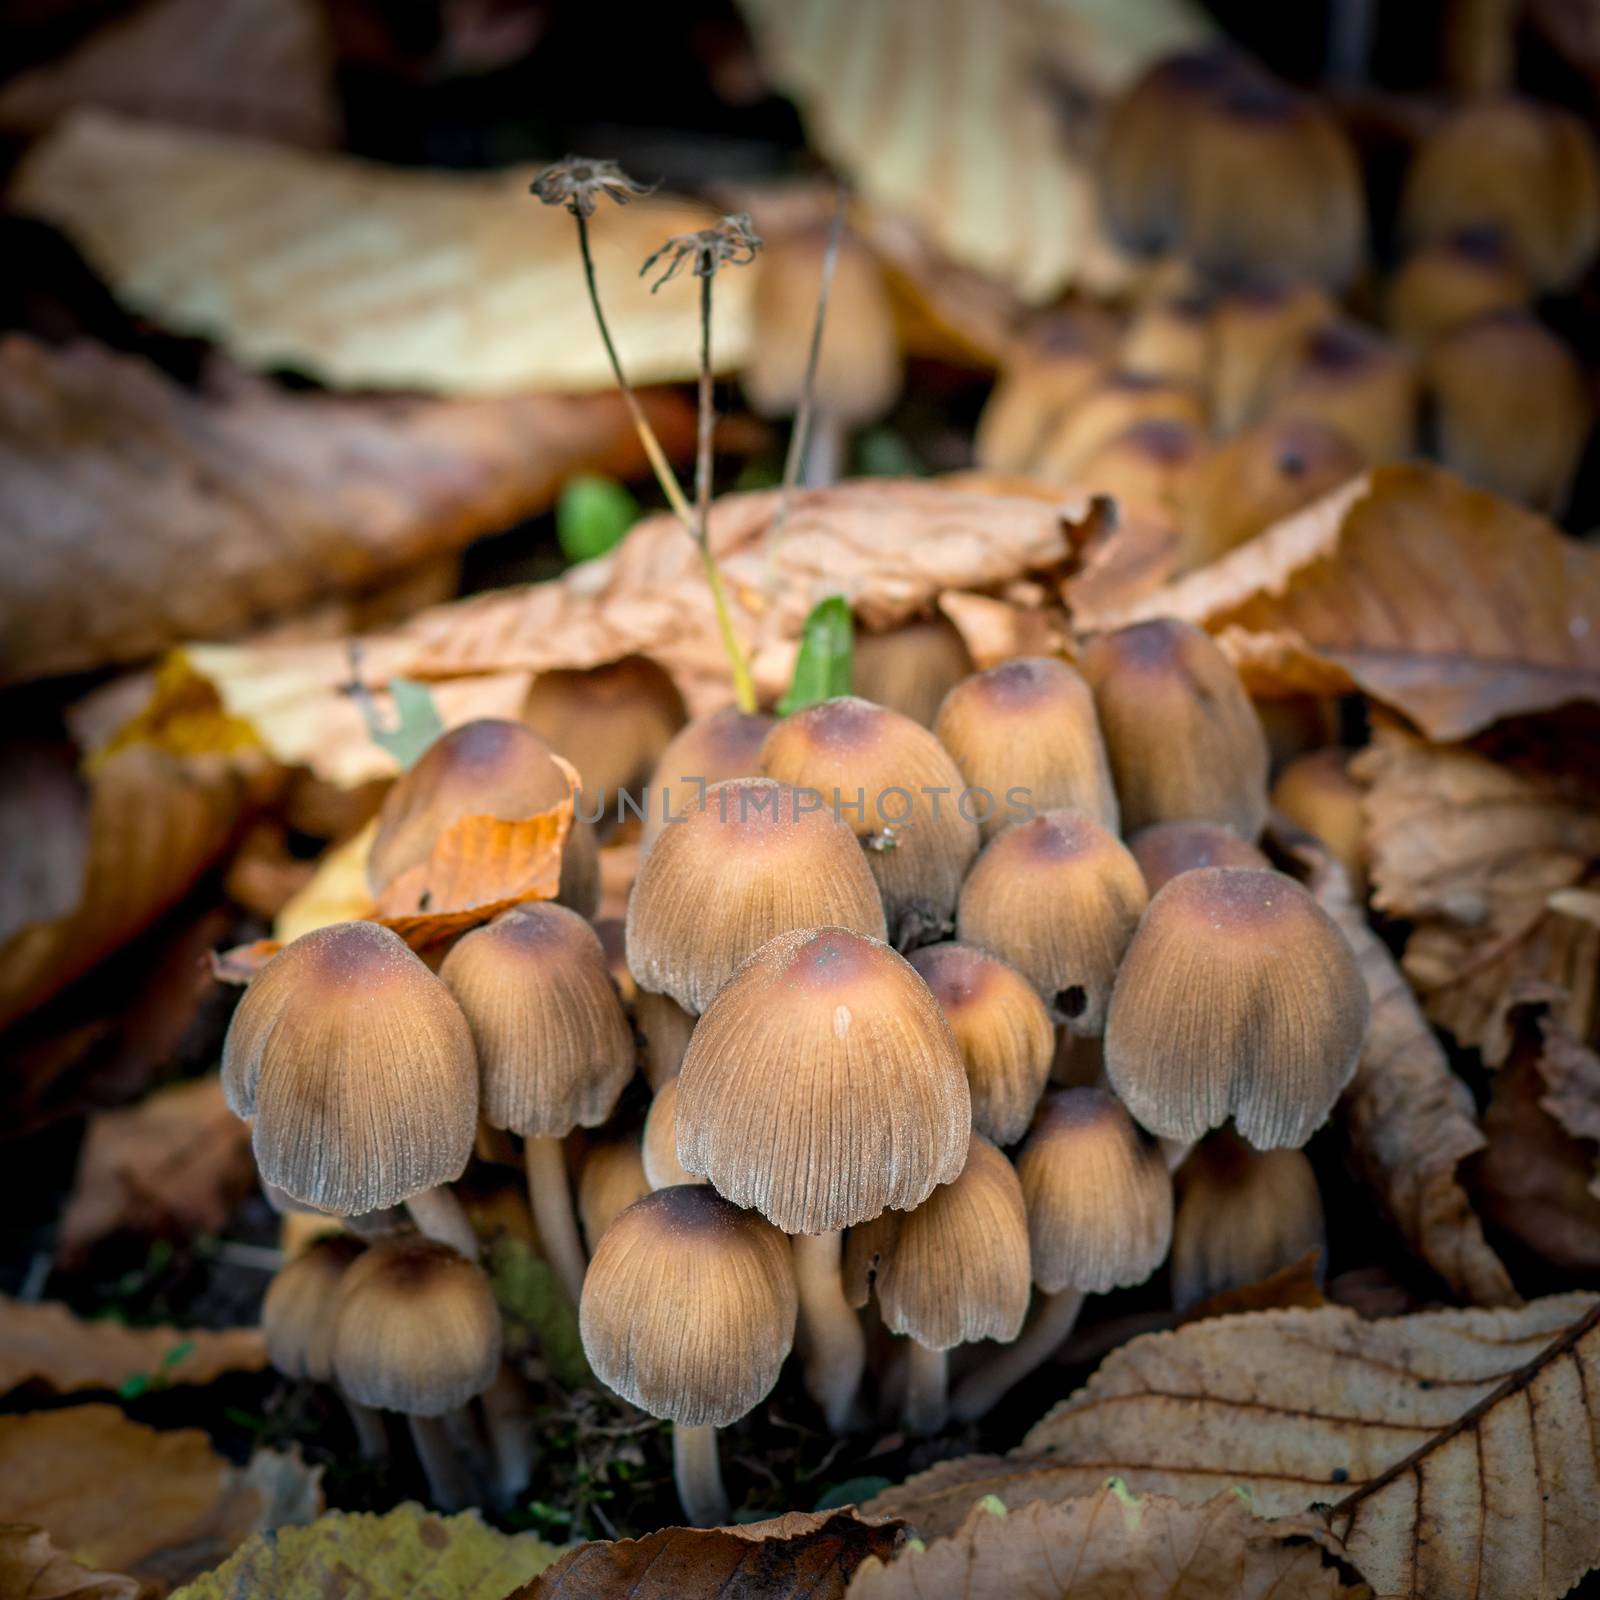 Mushrooms on a background of yellow foliage. Autumn landscape mushrooms growing in the meadow. A family of mushrooms in yellowed foliage. Close-up photo of poisonous mushrooms. 1:1 aspect ratio.